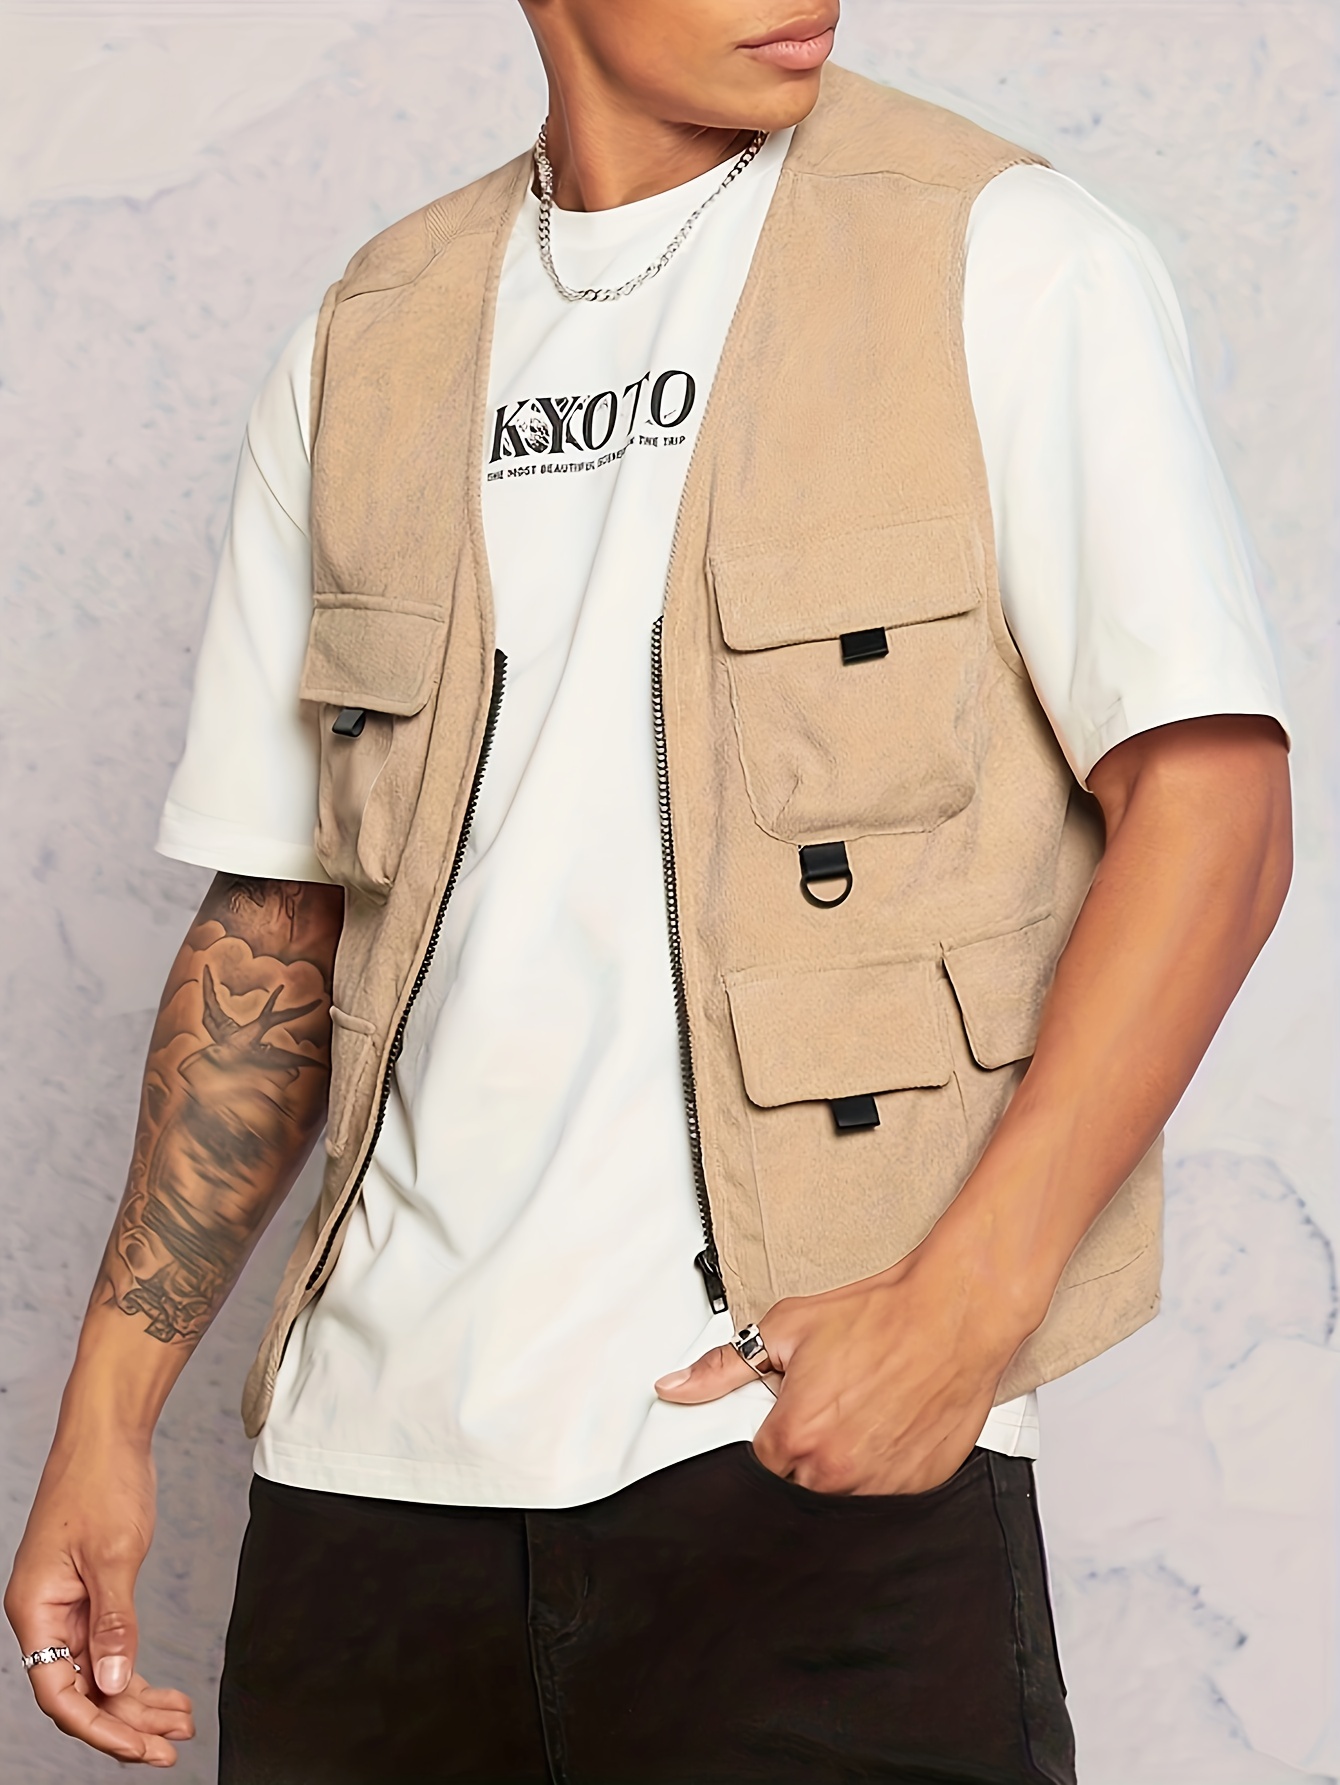 Chic Flap Pockets Cargo Vest, Men's Casual Outwear Zip Up Vest For Outdoor  Fishing Photography